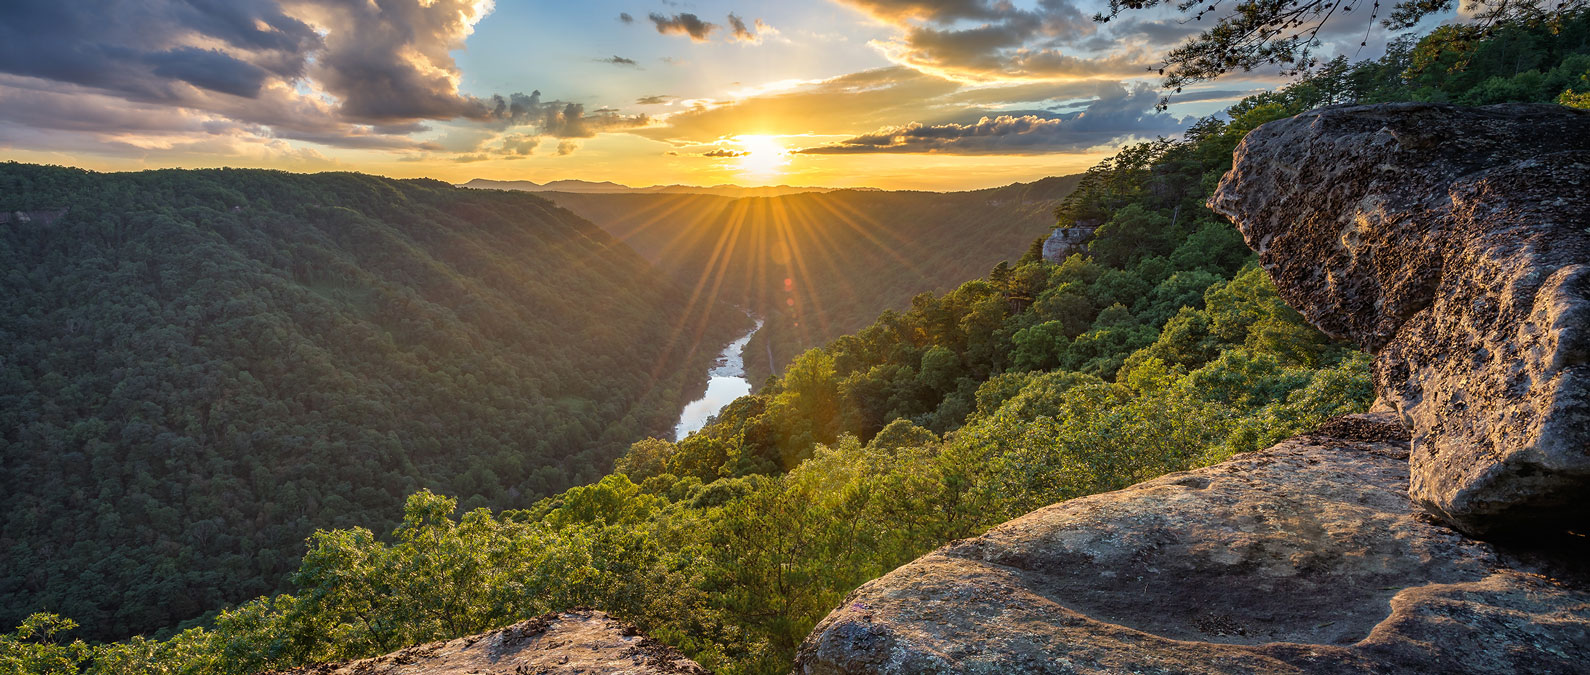 sunset view in the hills with the river below River Expeditions West Virginia